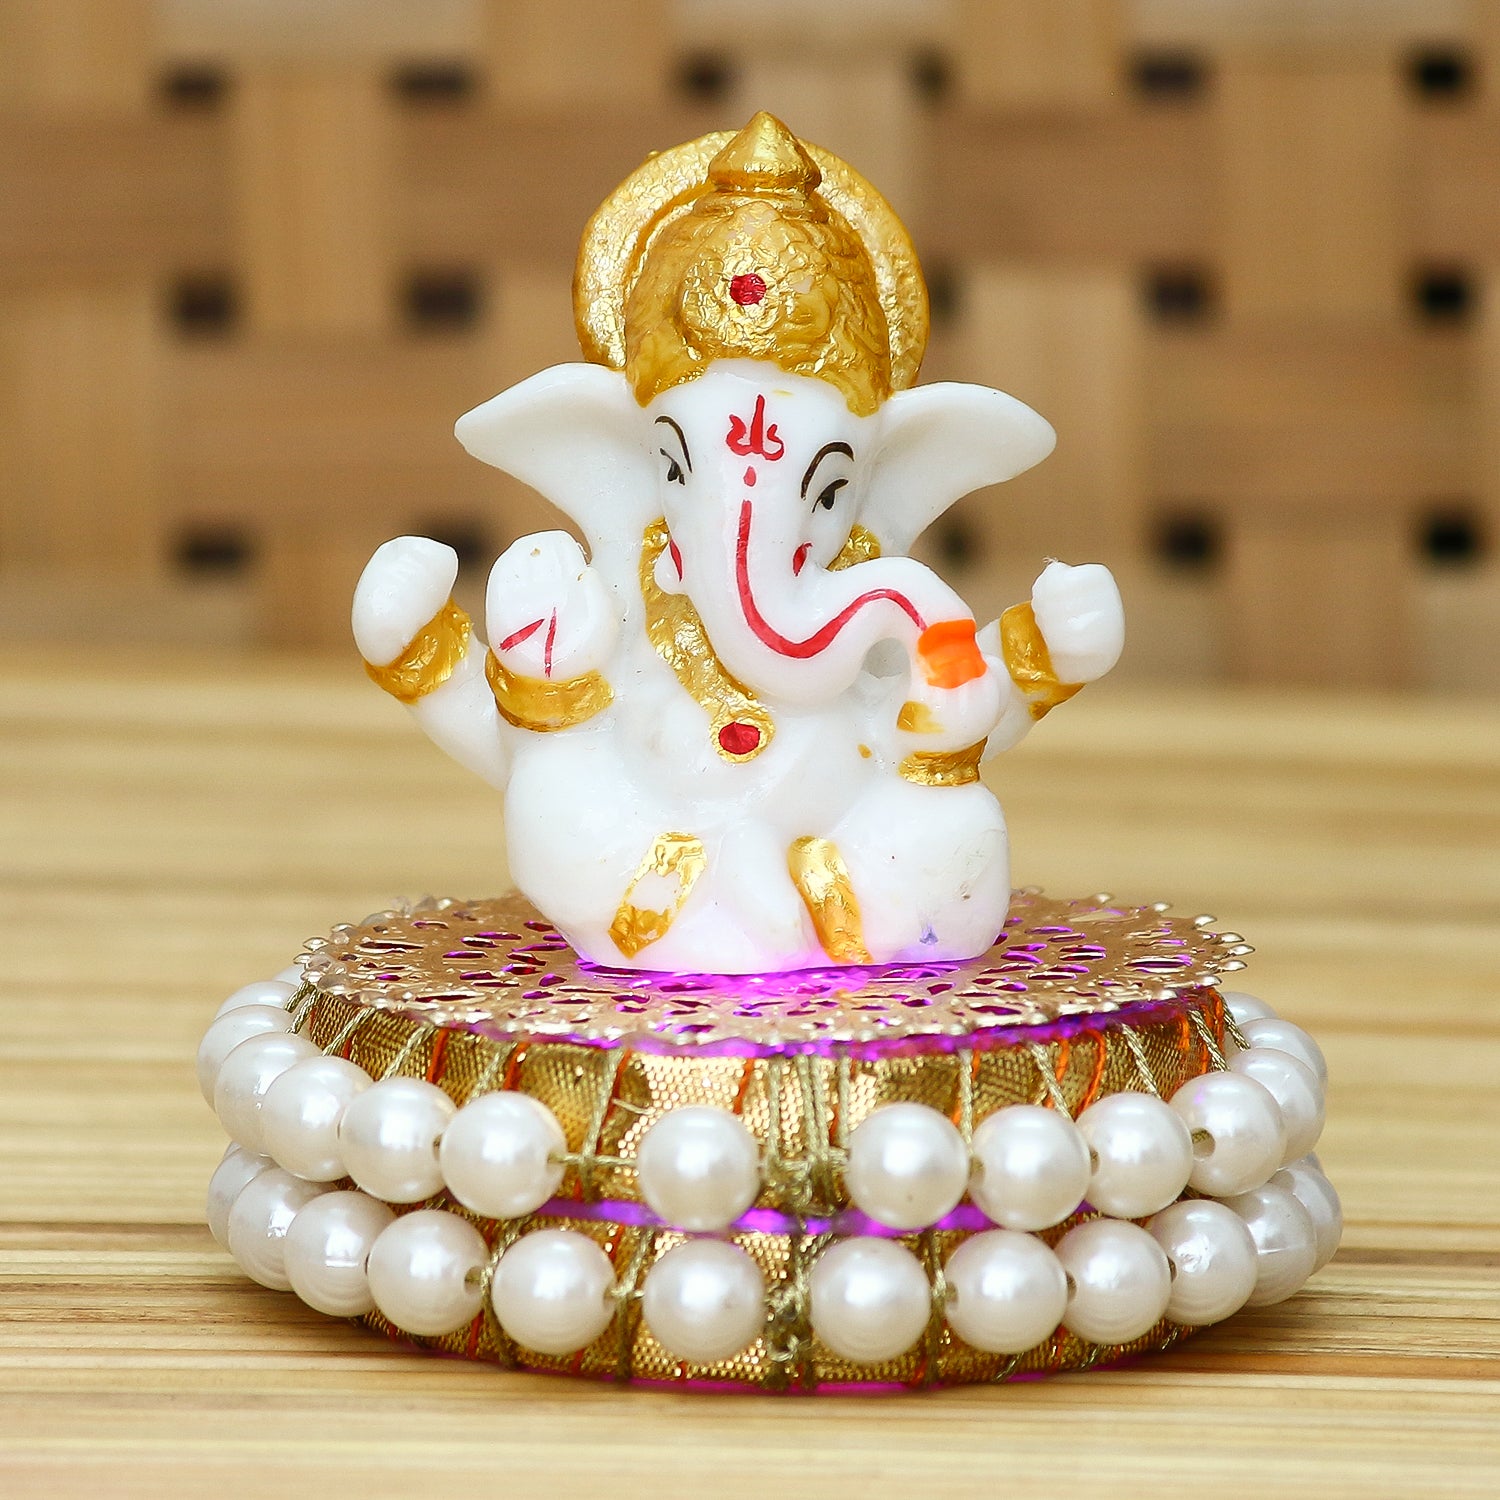 Gold and White Polyresin Lord Ganesha Idol on Decorative Handcrafted Plate for Home and Car Dashboard 2